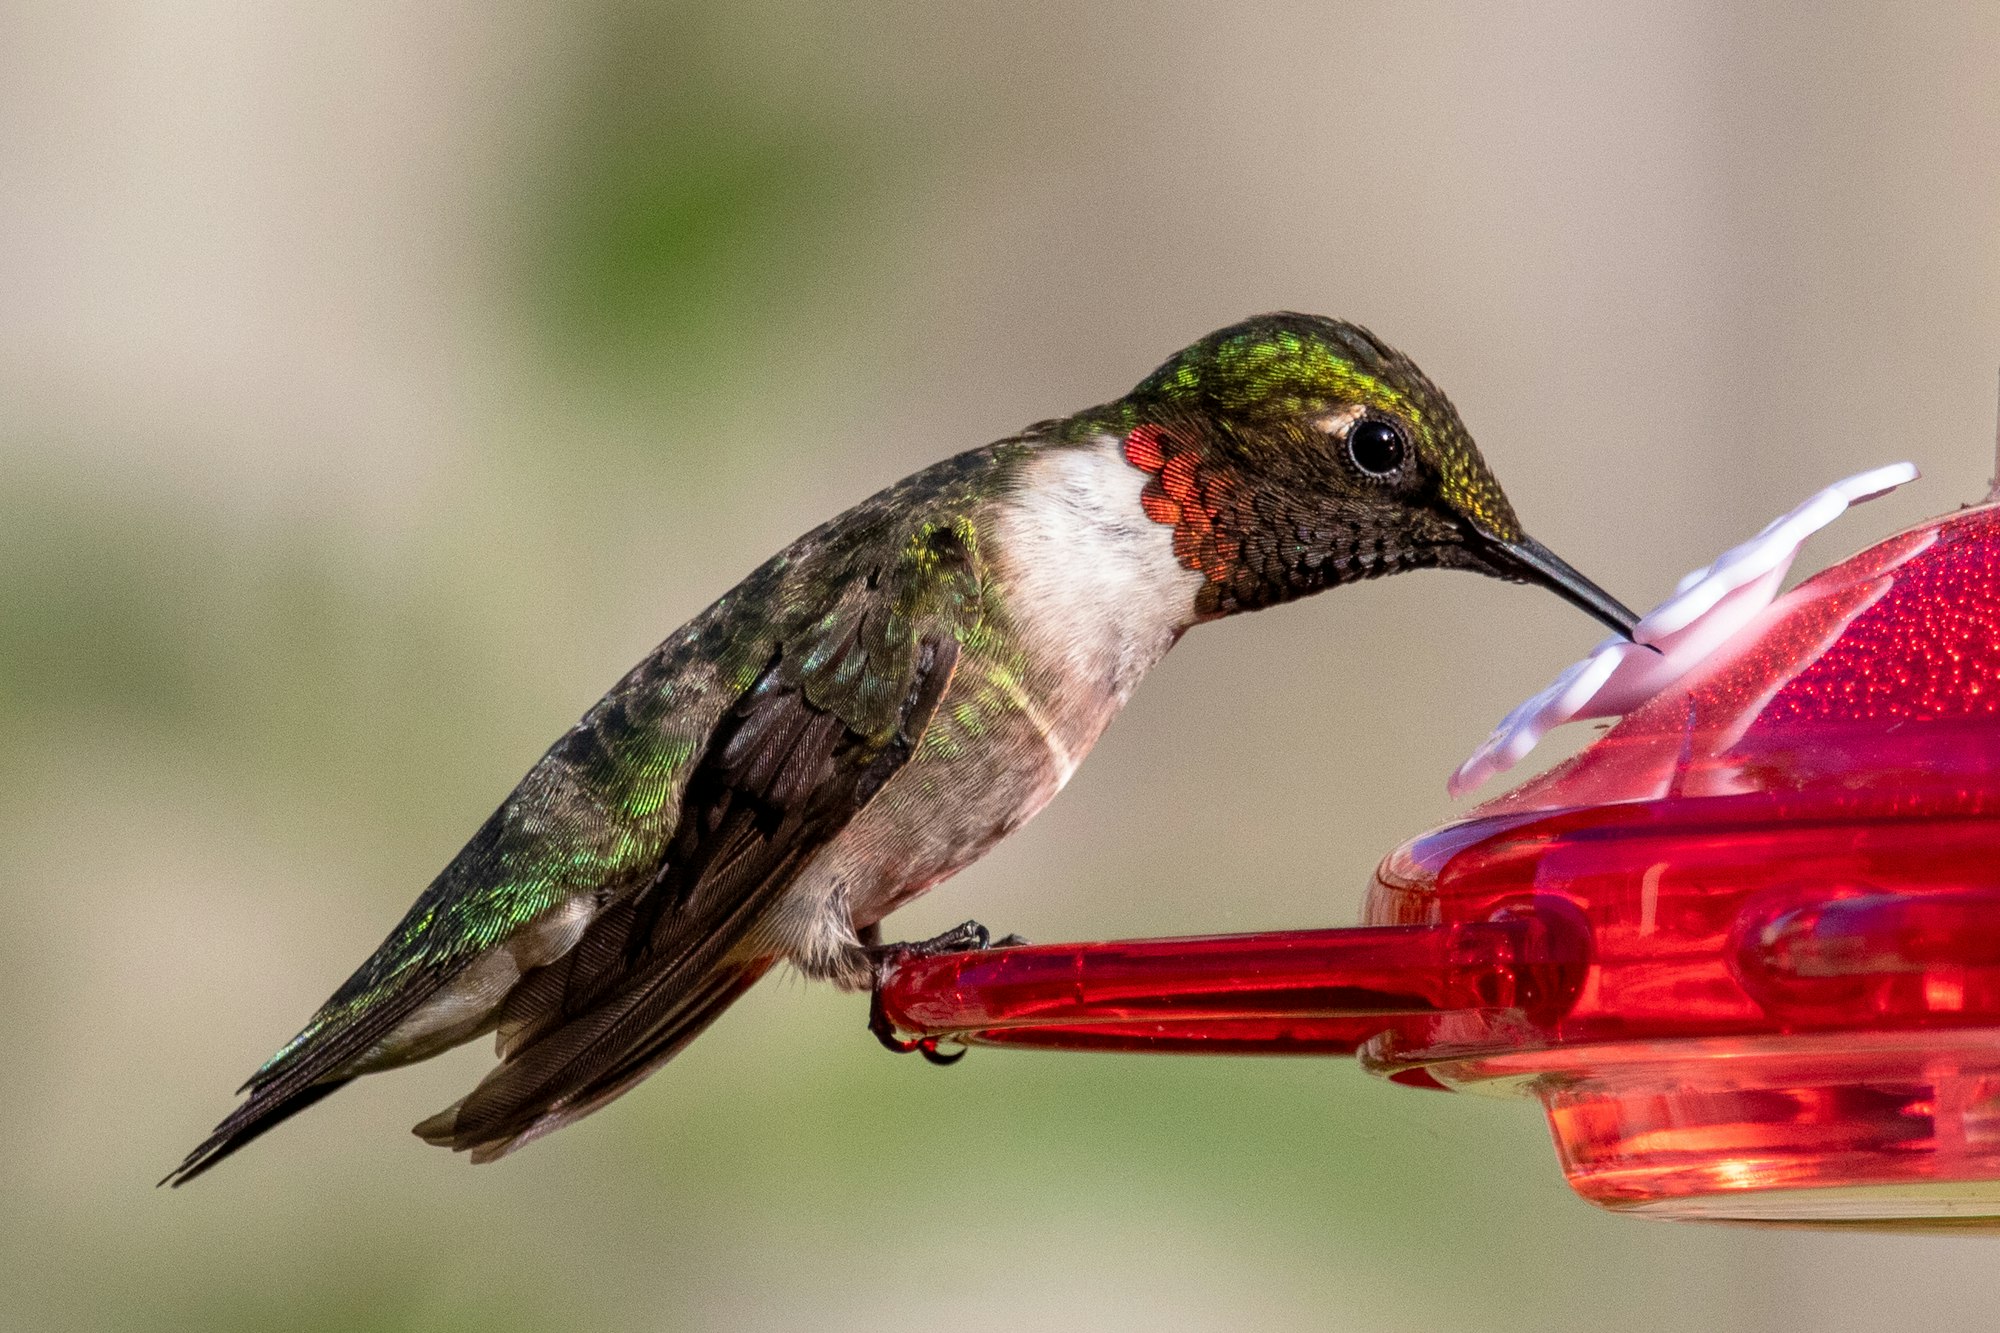 A humming bird gets a drink from the feeder in my backyard.